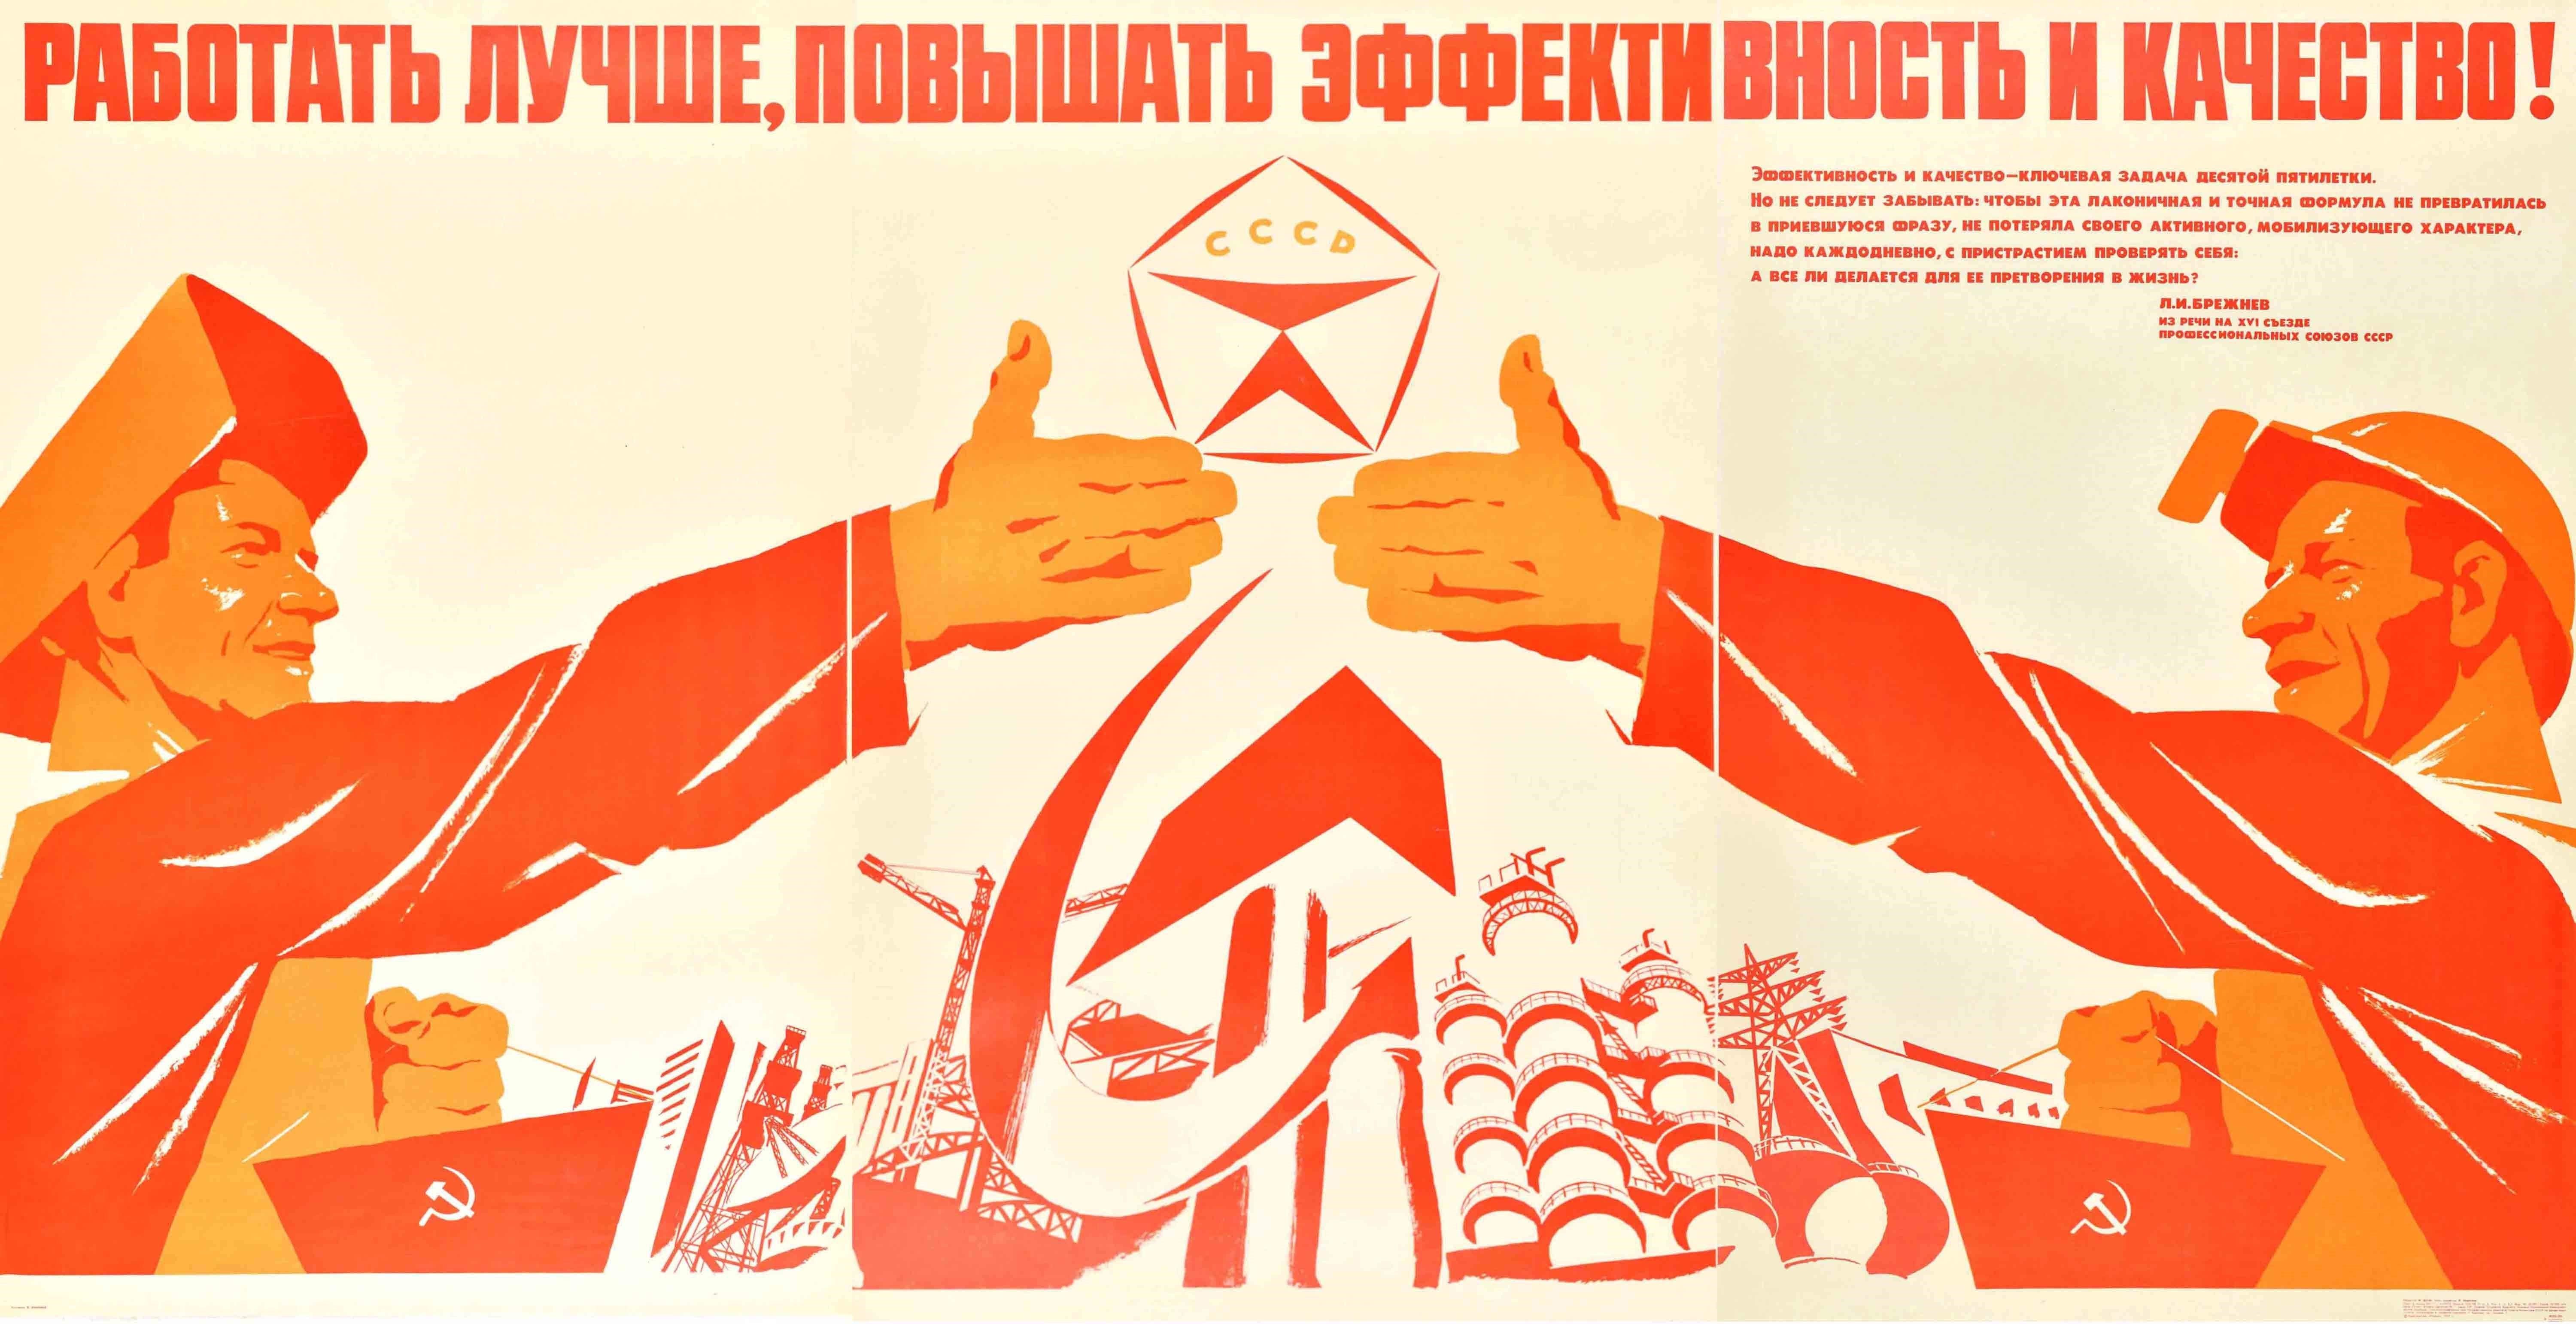 Original vintage Soviet propaganda poster featuring a dynamic design showing two workers holding red flags and reaching to each other with a seal of quality CCCP logo in the centre above a hammer and sickle emblem and industrial factory buildings,